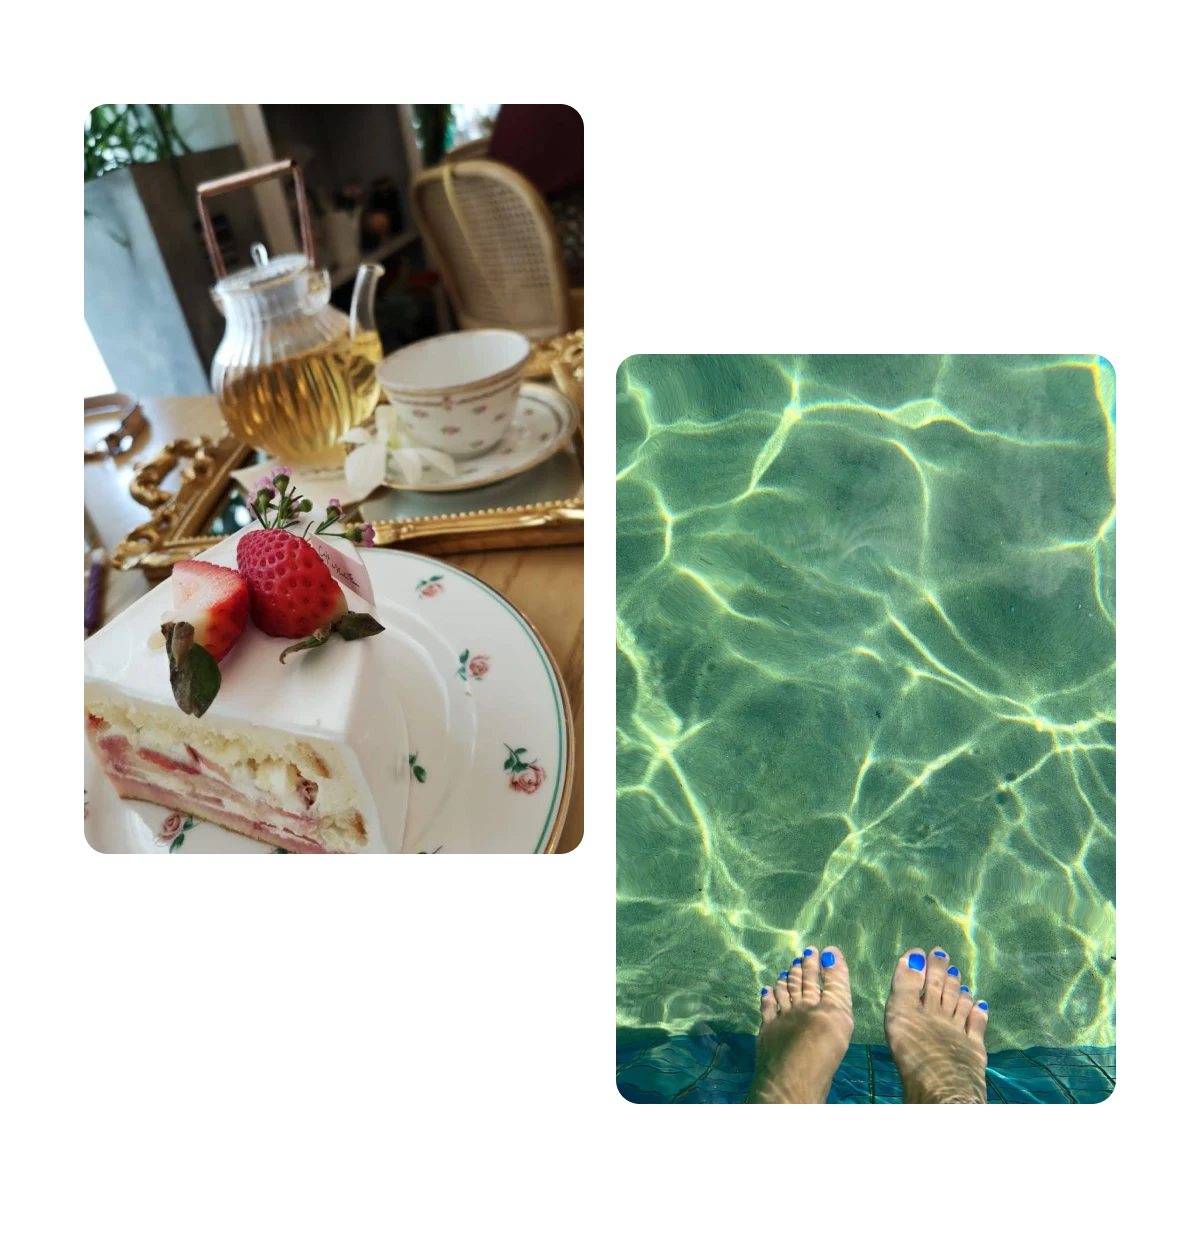 Two pins, slice of cake and tea, feet dipped in water